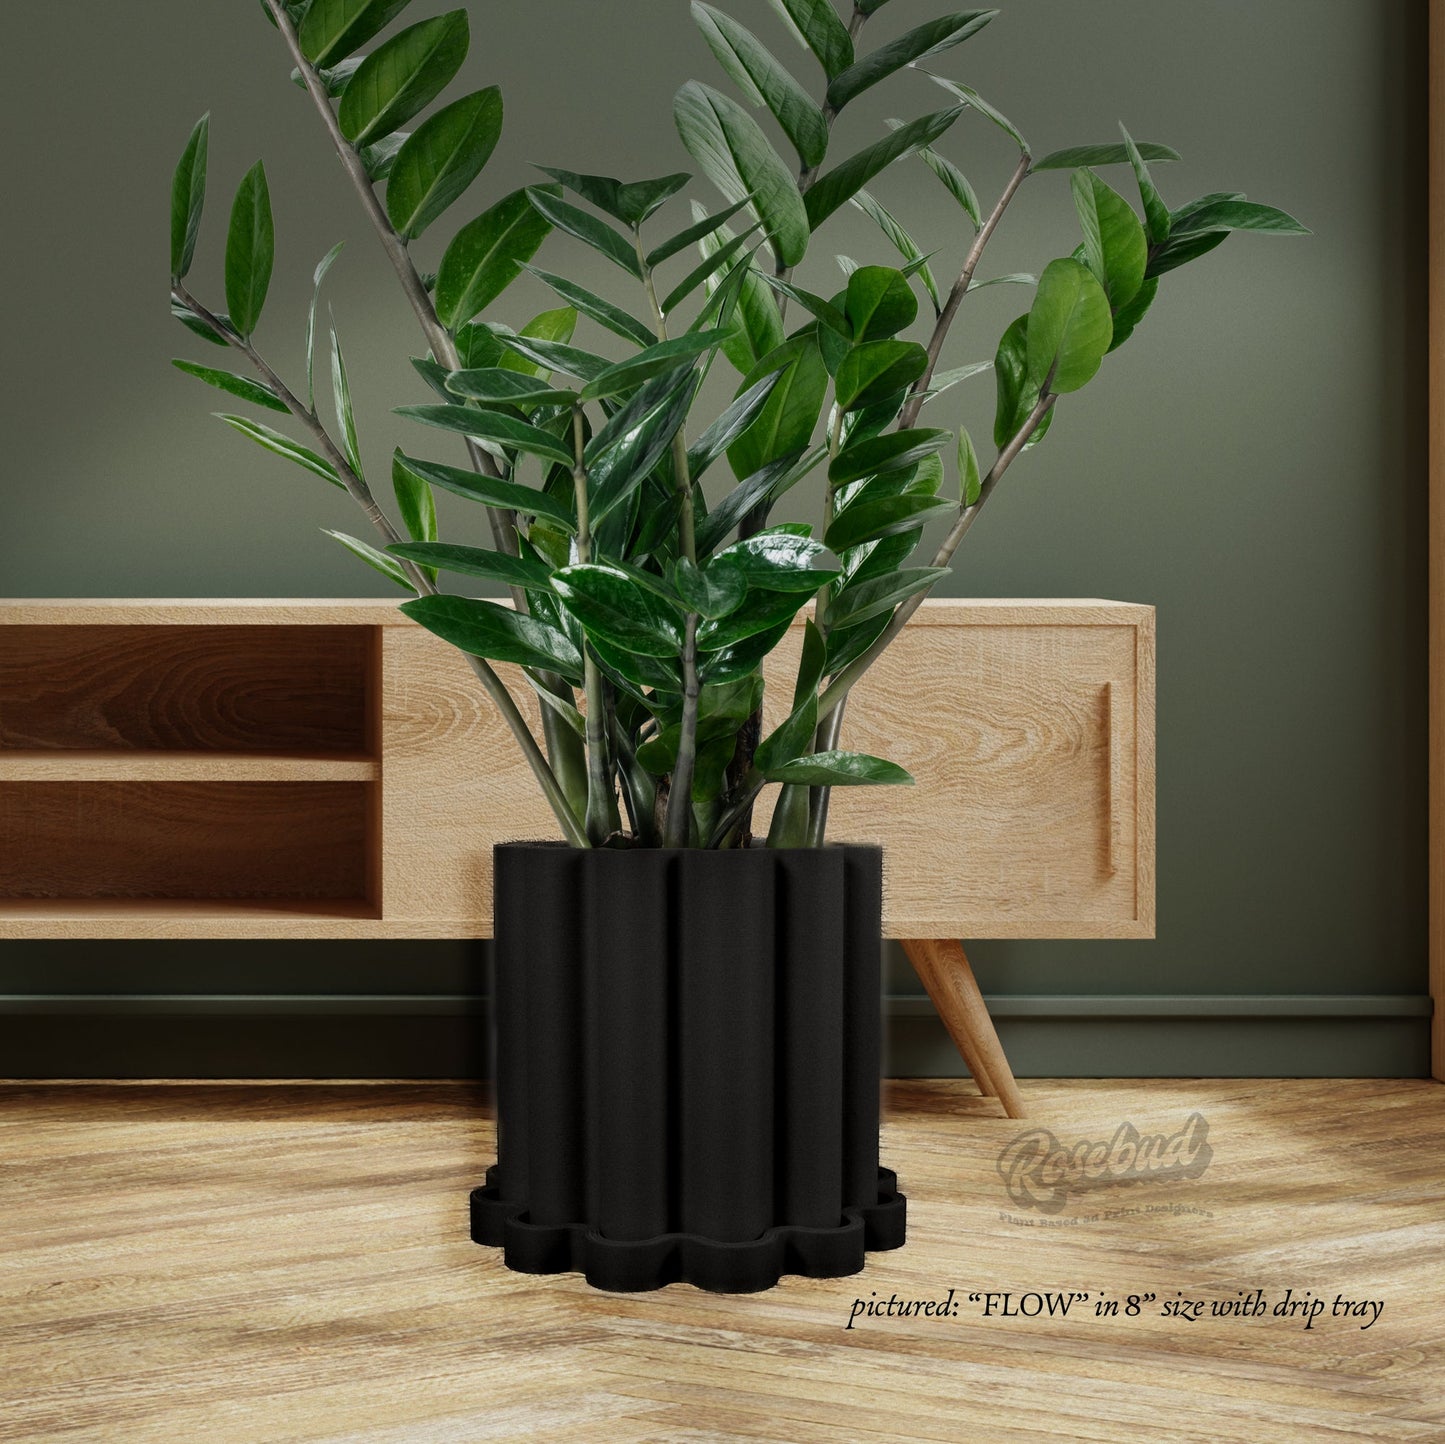 Funky Plant Pot, Mid Century Modern Pots with Drainage and Saucer, Cache Planter Pot "FLOW" - Rosebud HomeGoods Black 4 Without Drip Tray MODERN HOME GOOD